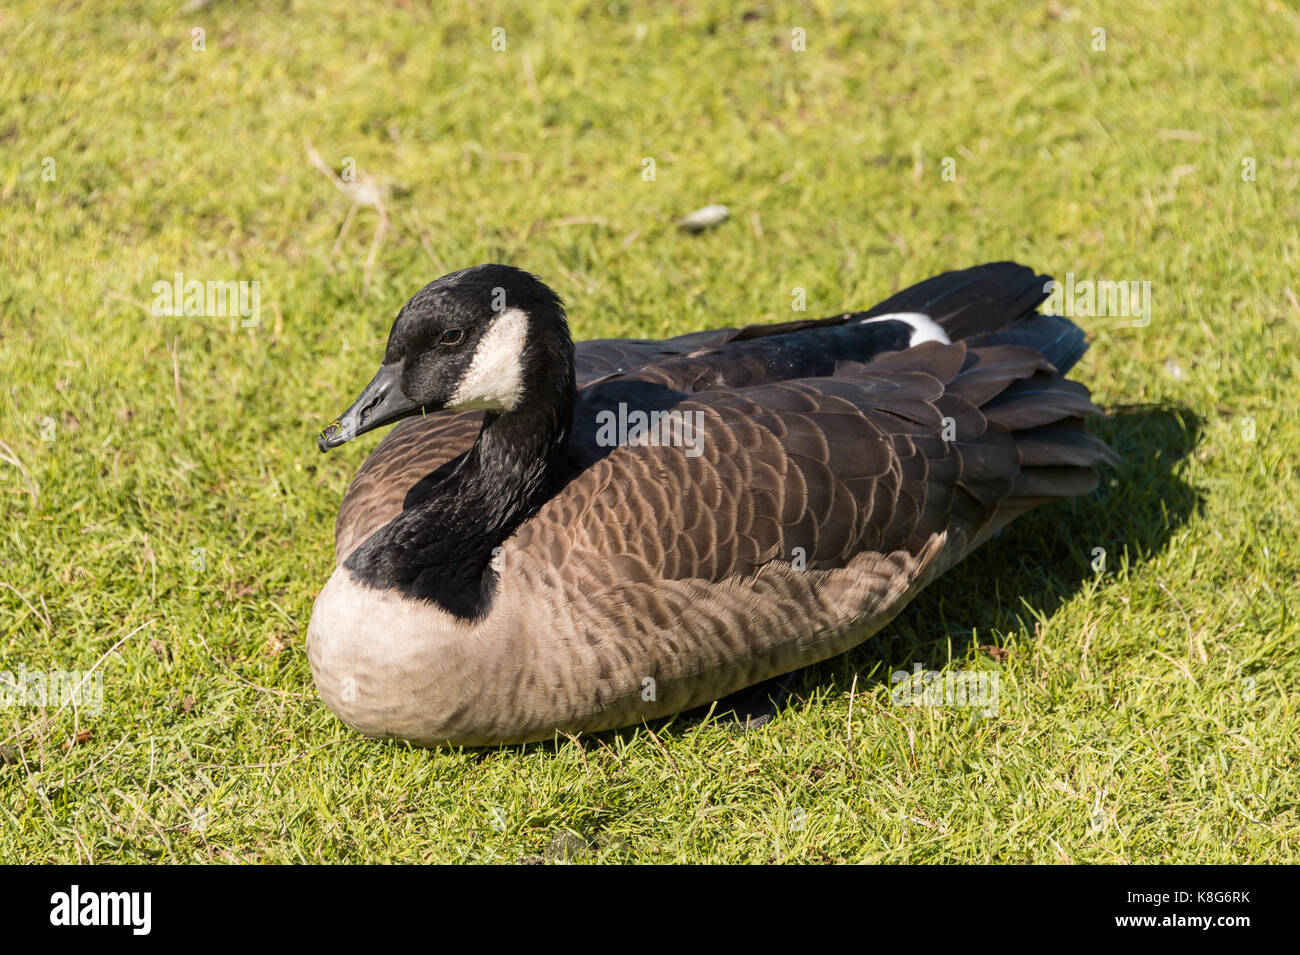 Canada goose sitting on grass in Vancouver, British Columbia, Canada Stock  Photo - Alamy